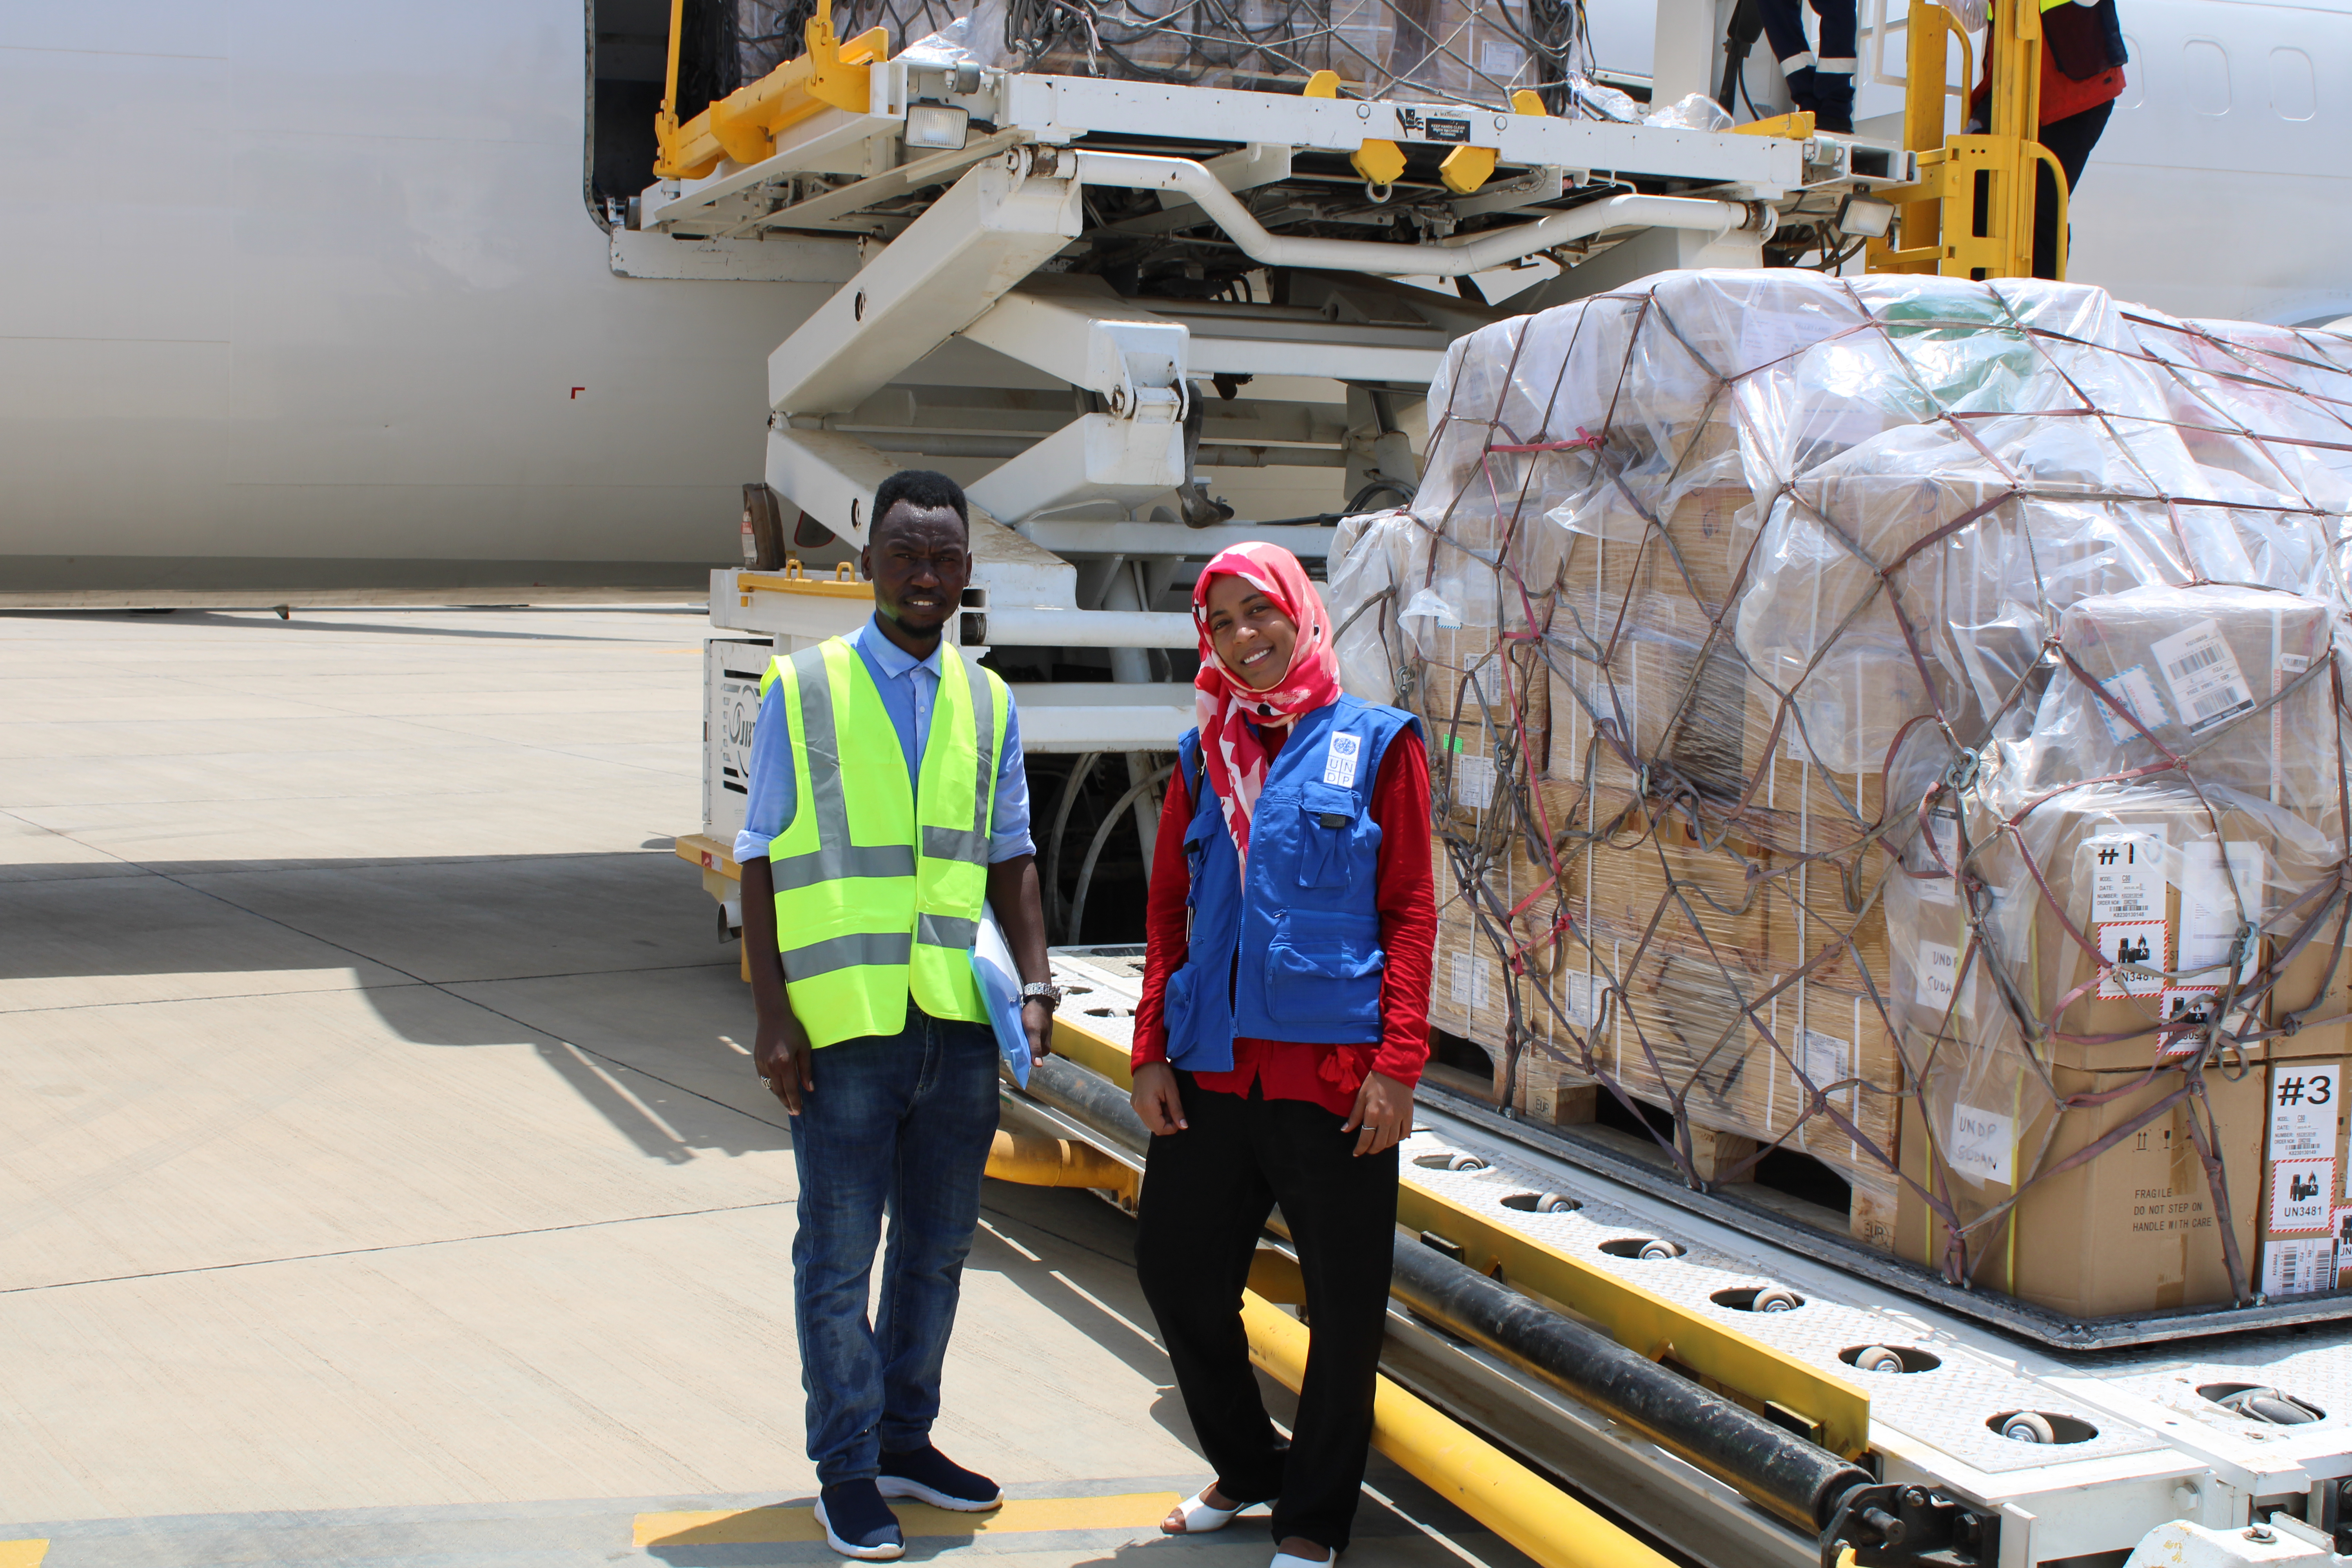 man and woman standing in front of plane cargo